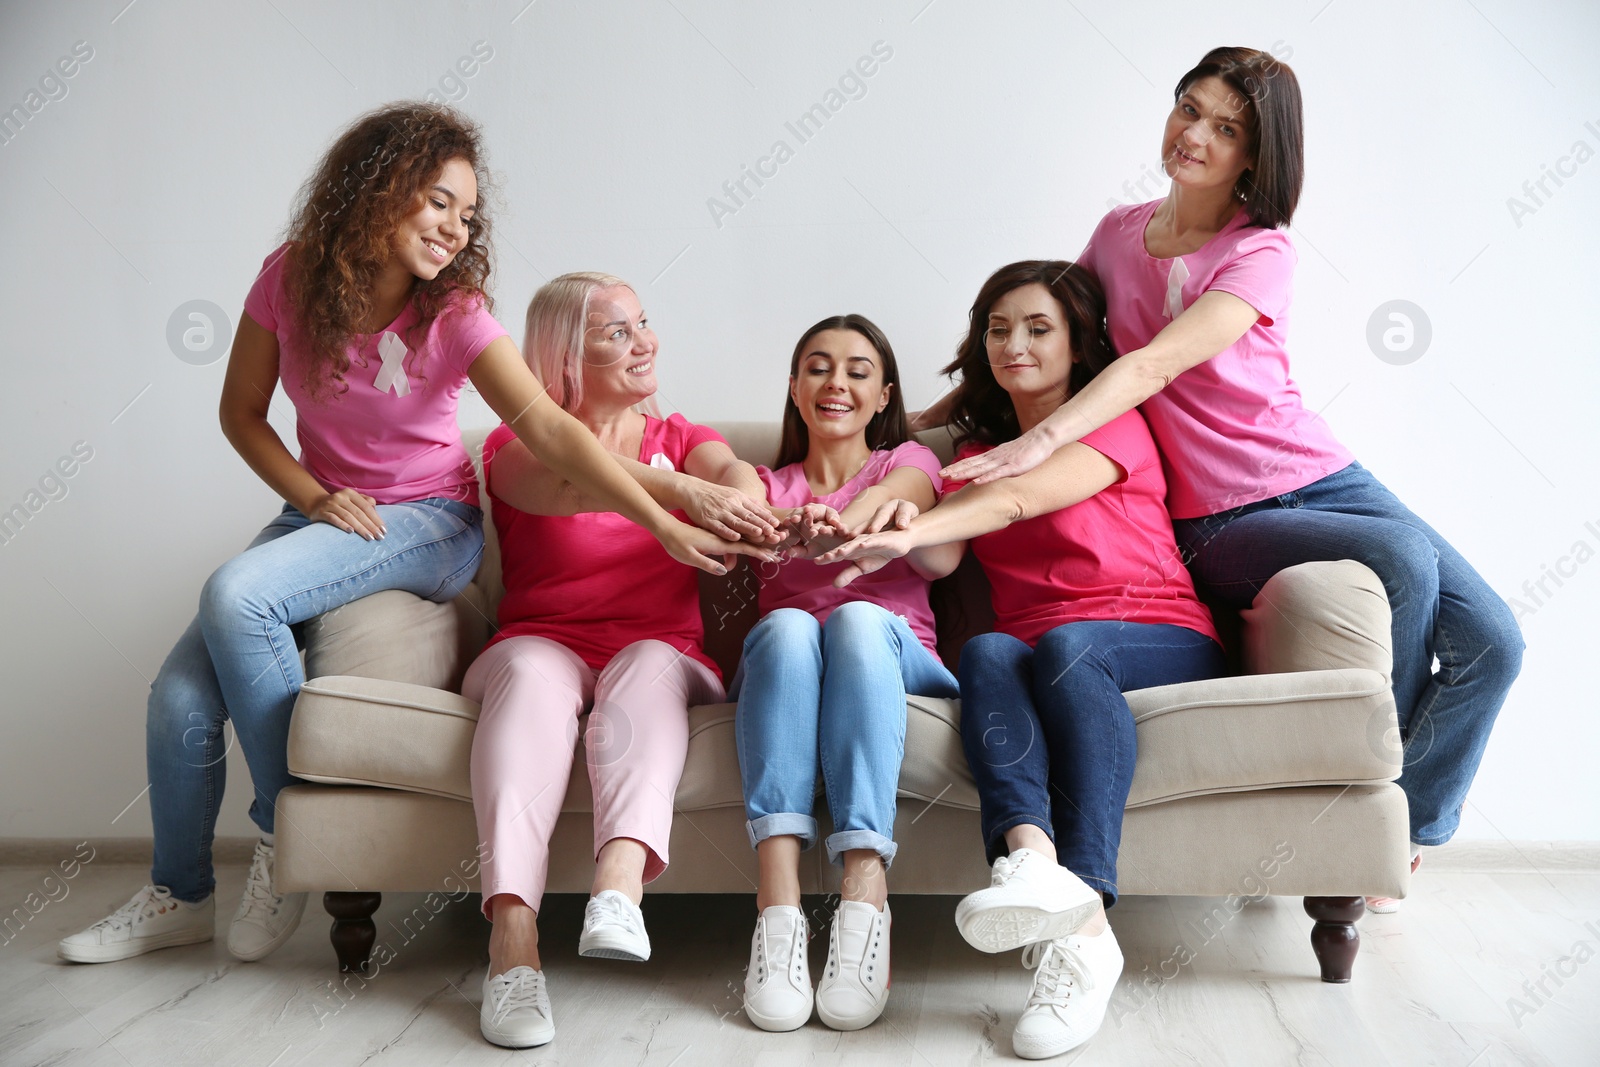 Photo of Group of women with silk ribbons joining hands on sofa against light wall. Breast cancer awareness concept